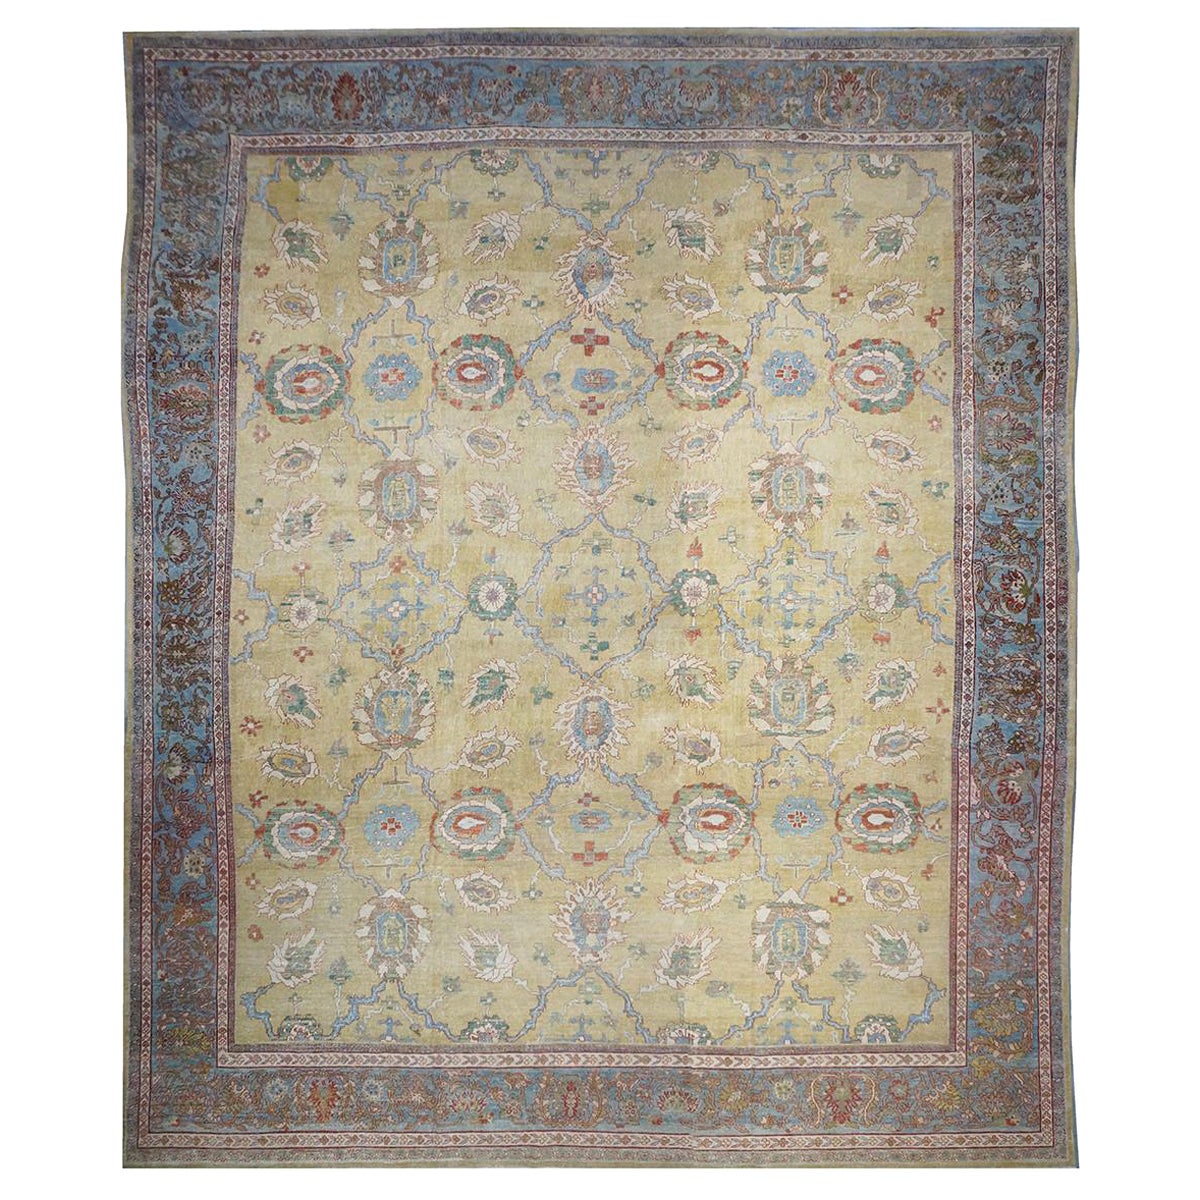 1880s Antique Persian Sultanabad 16x19 Tan, Blue, & Ivory Handmade Area Rug For Sale